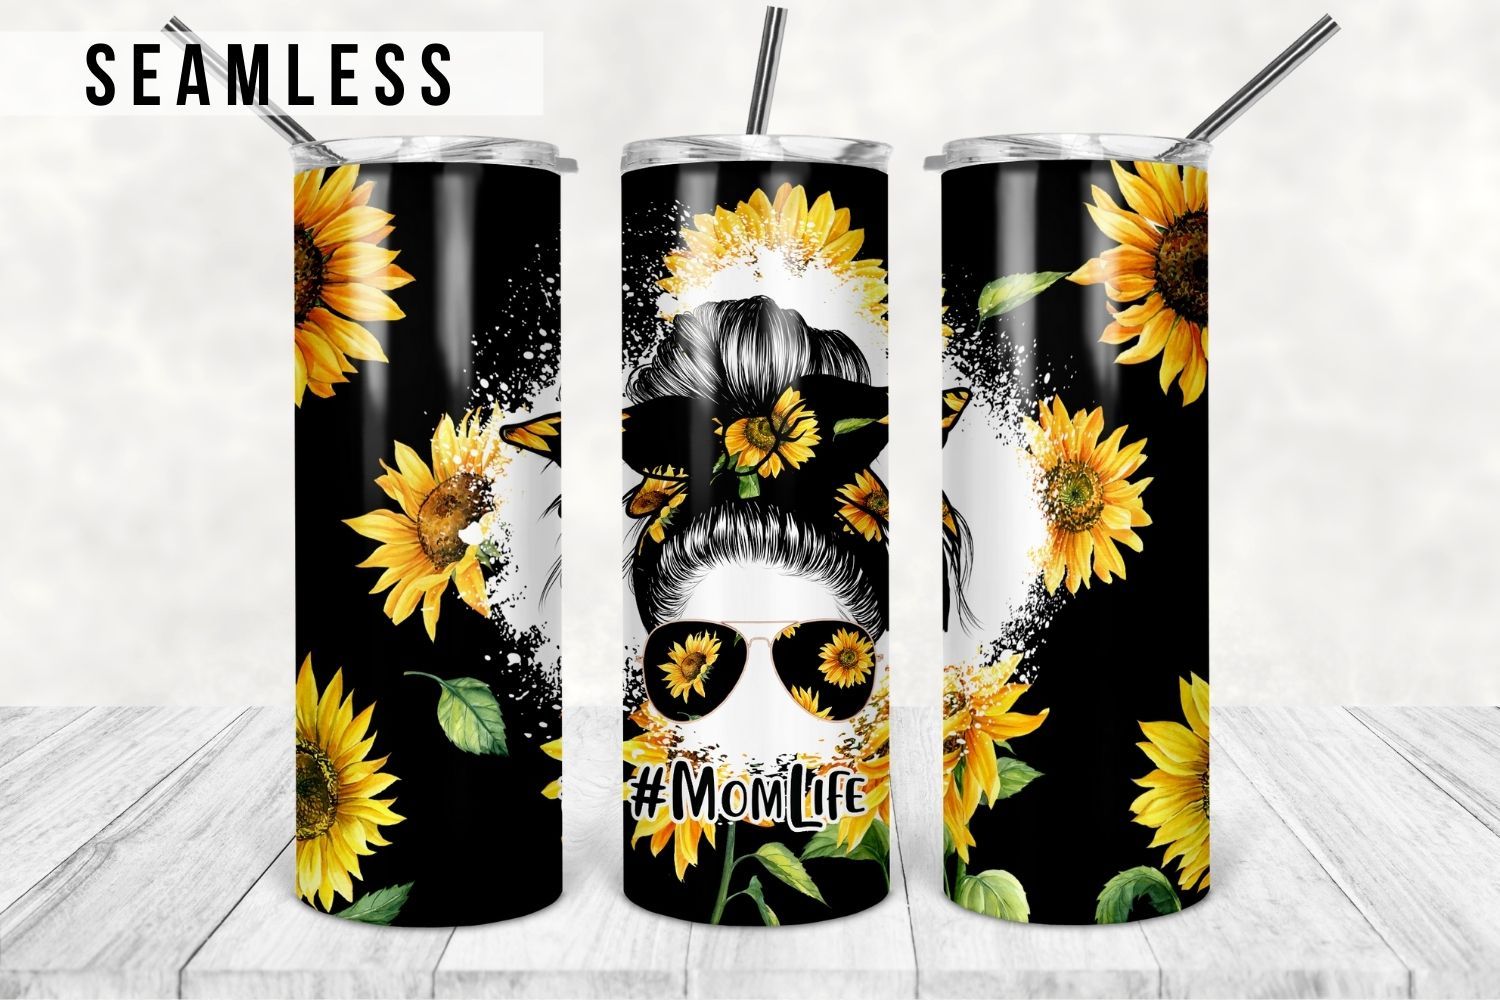 American Mama Seamless 20oz Sublimation Tumbler, Mothers Day - Inspire  Uplift